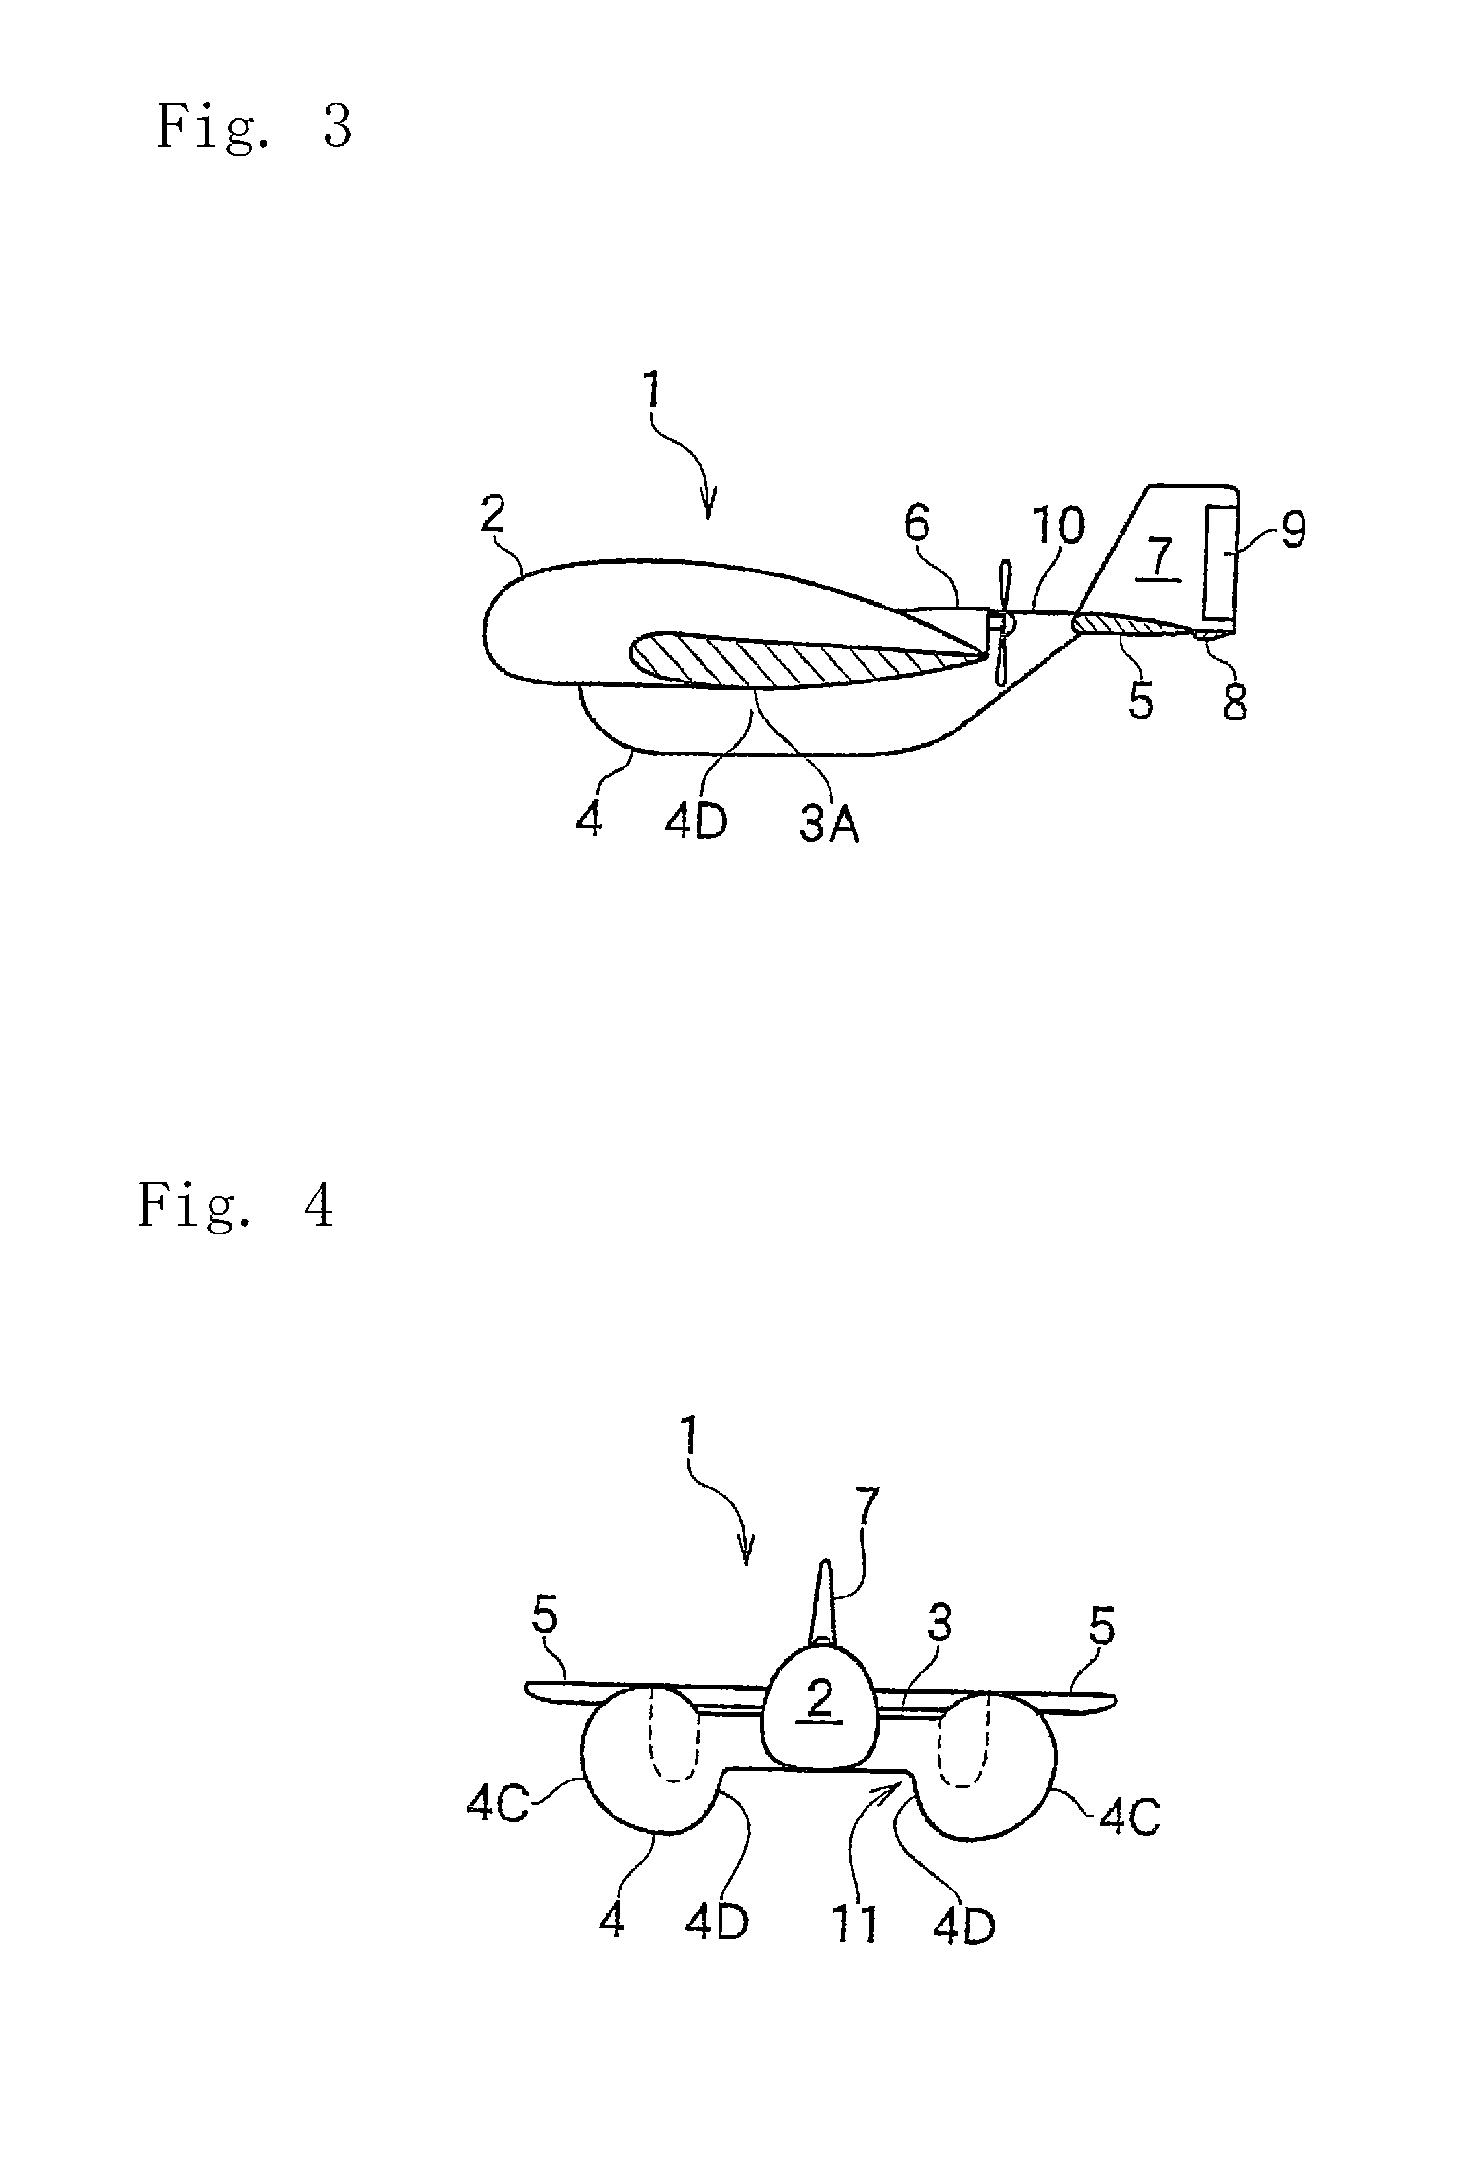 Positive-pressure flying aircraft